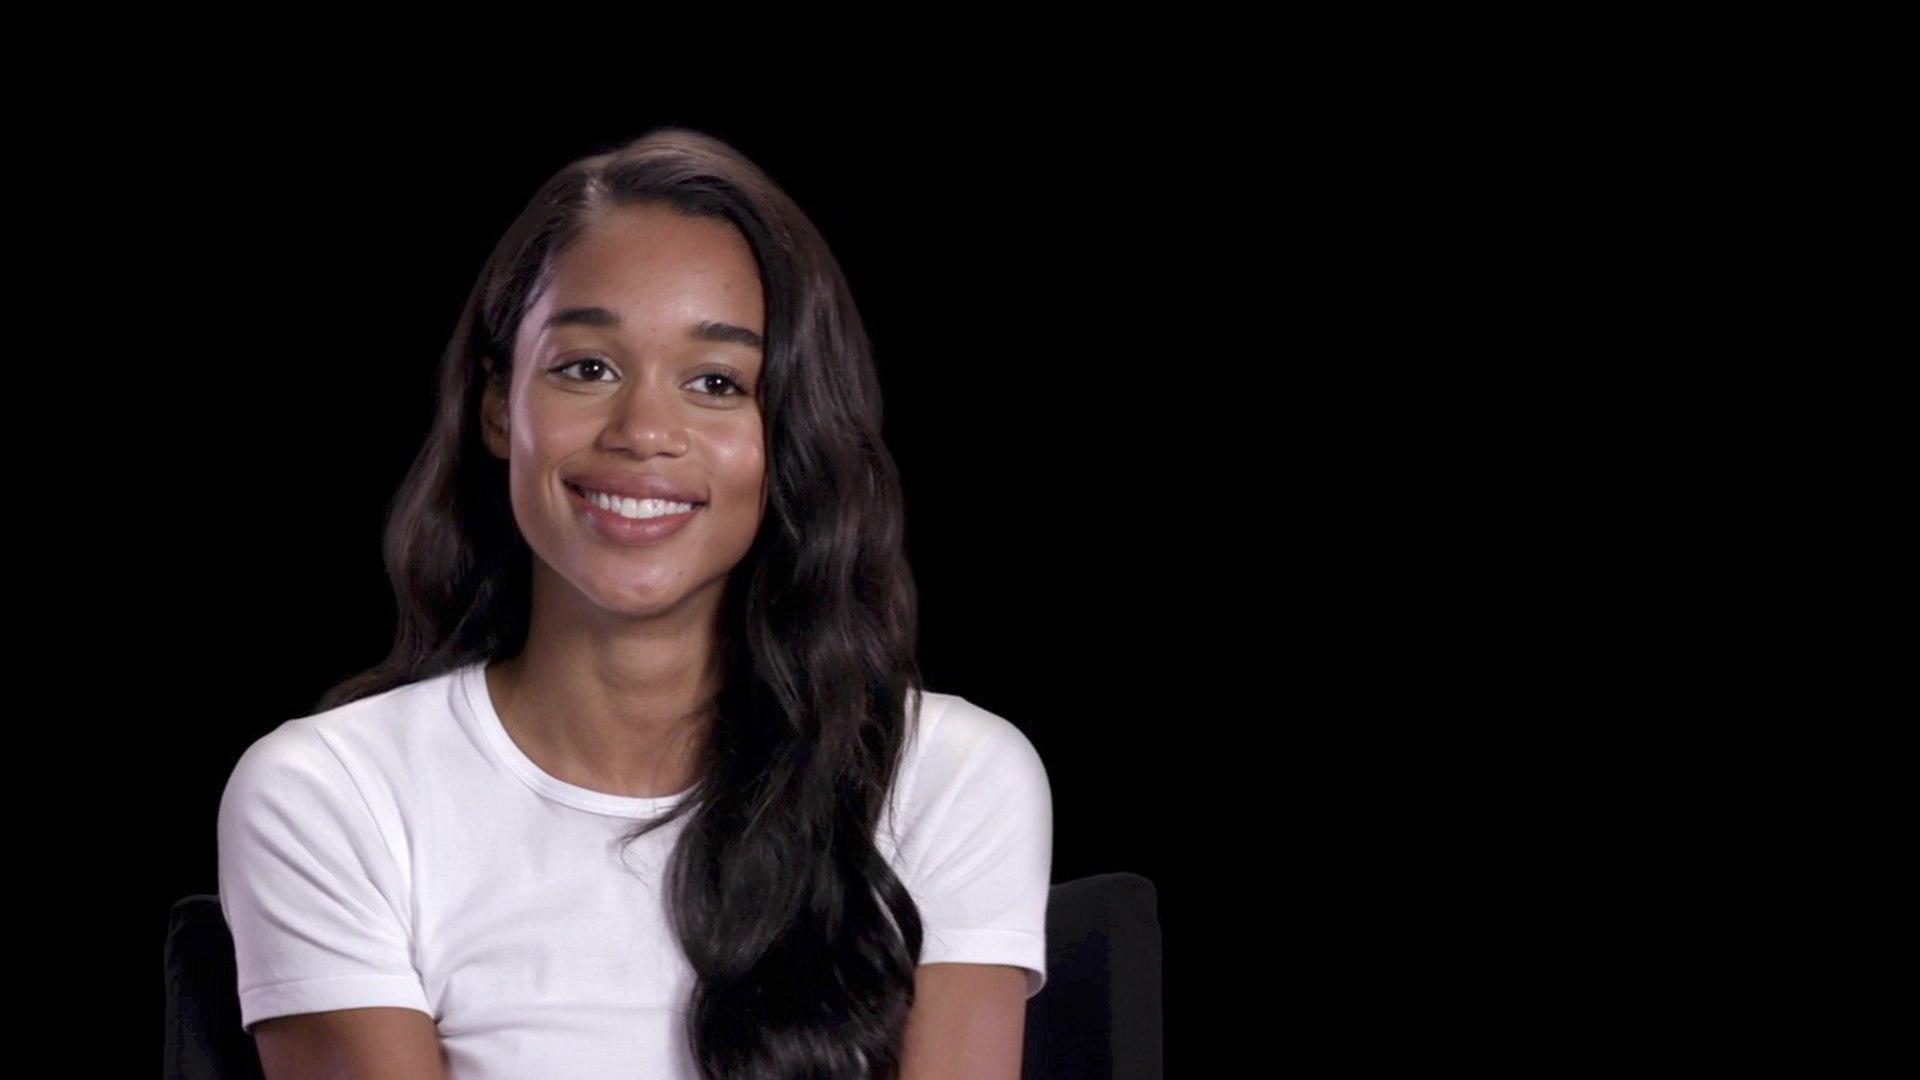 Laura Harrier On Why We Haven't Beat Racism Or Bigotry Yet